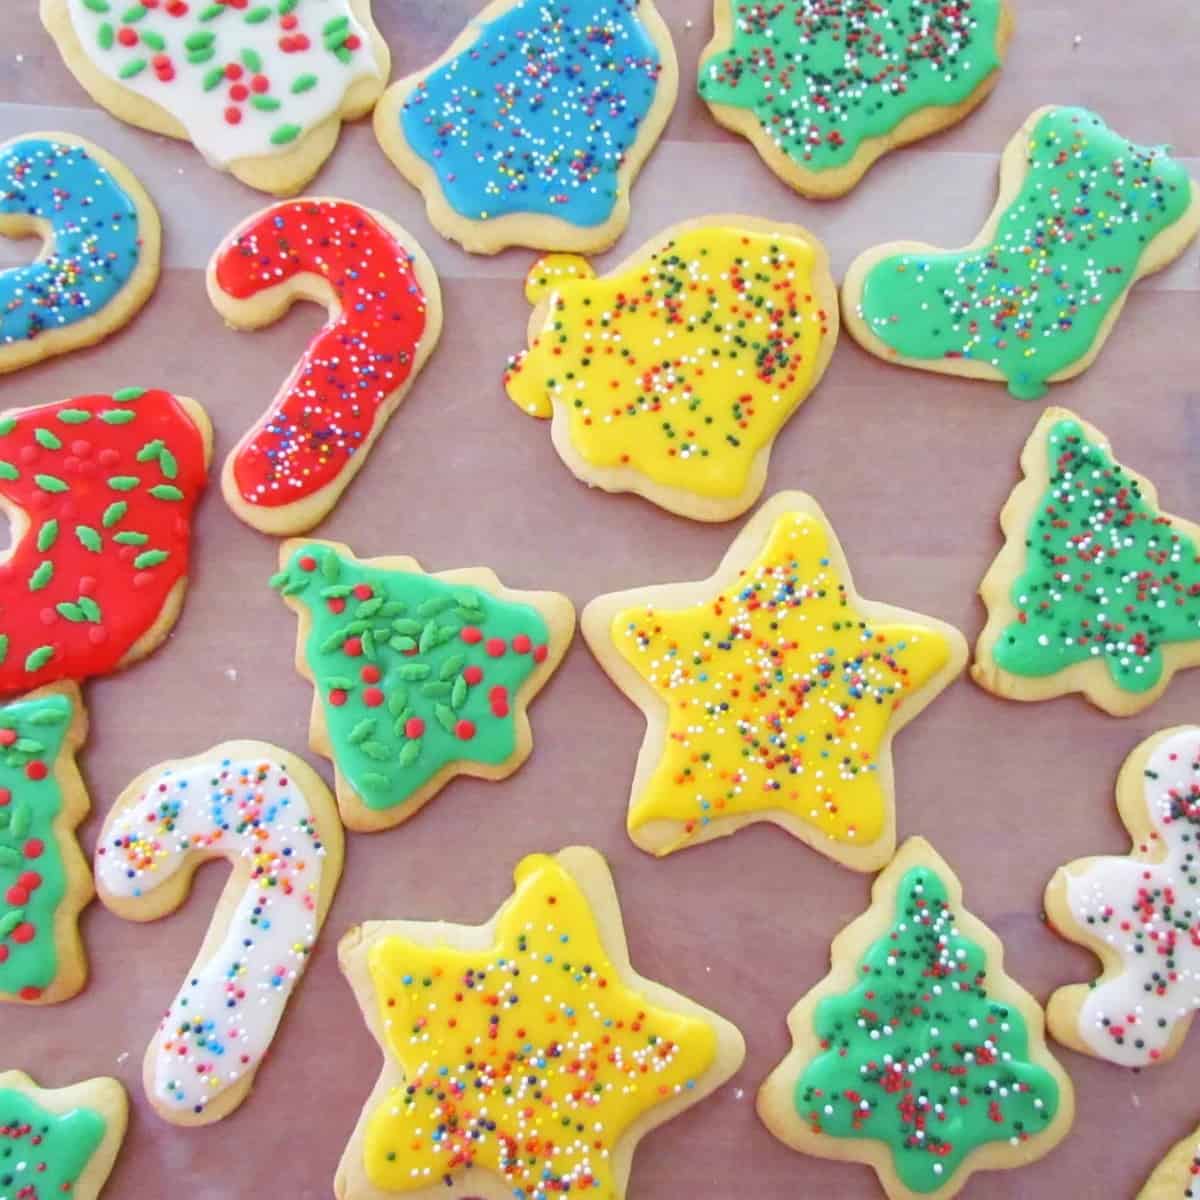 Christmas Cut-Out Sugar Cookies (+Video)